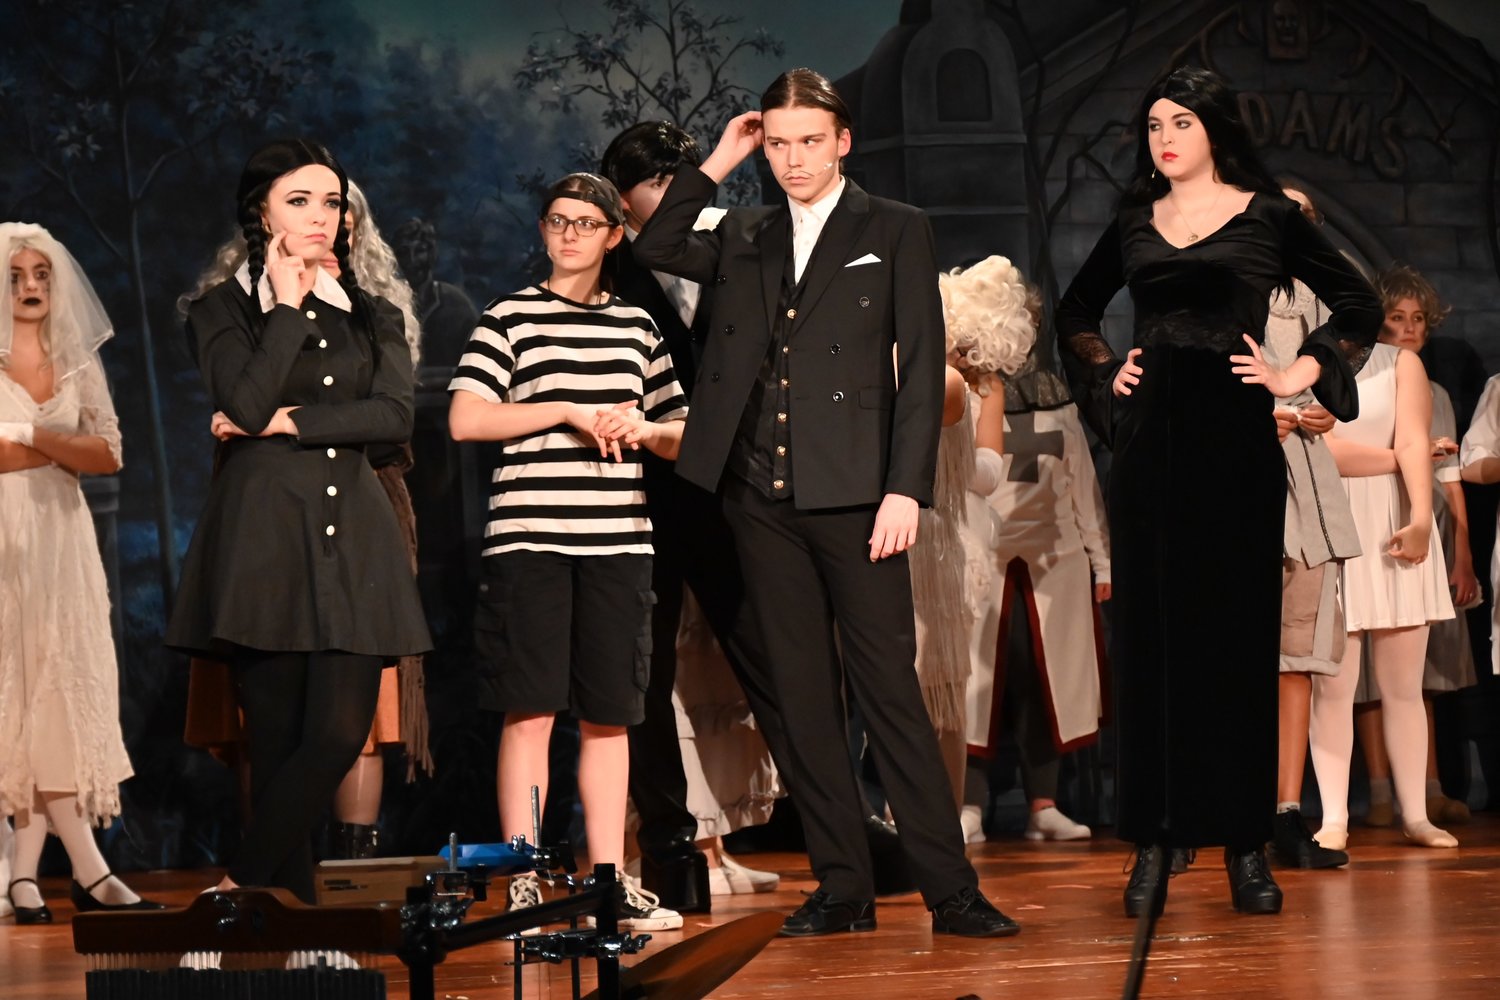 Sammie Fales performed as Wednesday with the Long Beach High School students in “The Addams Family.”